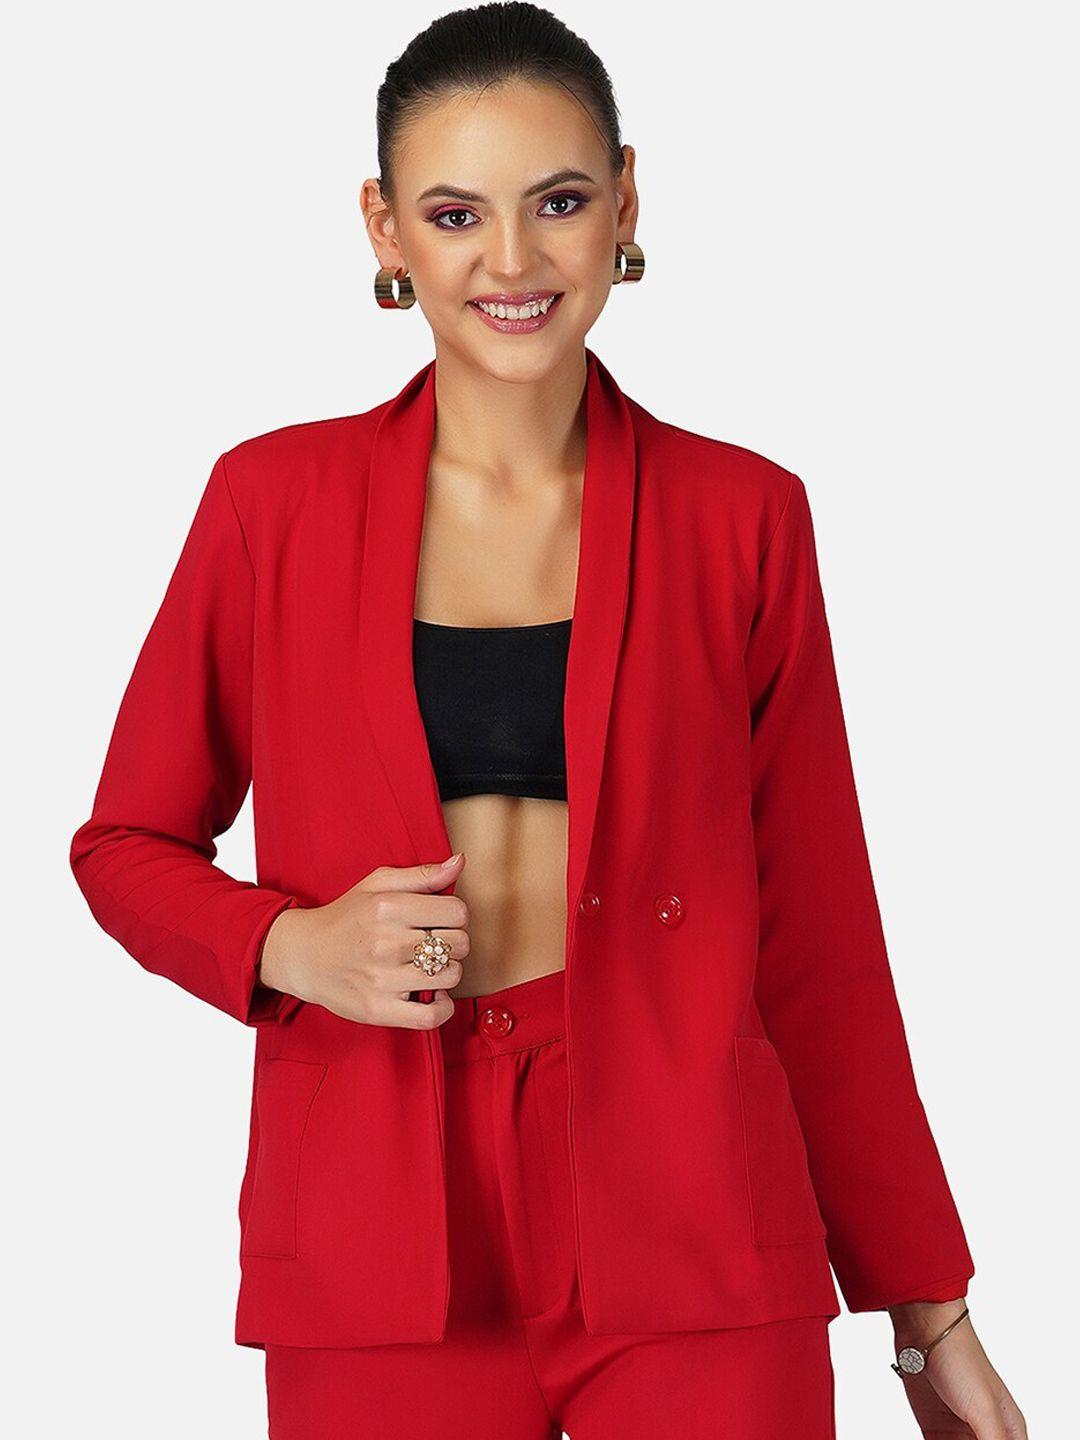 tinted-women-single-breasted-formal-blazers